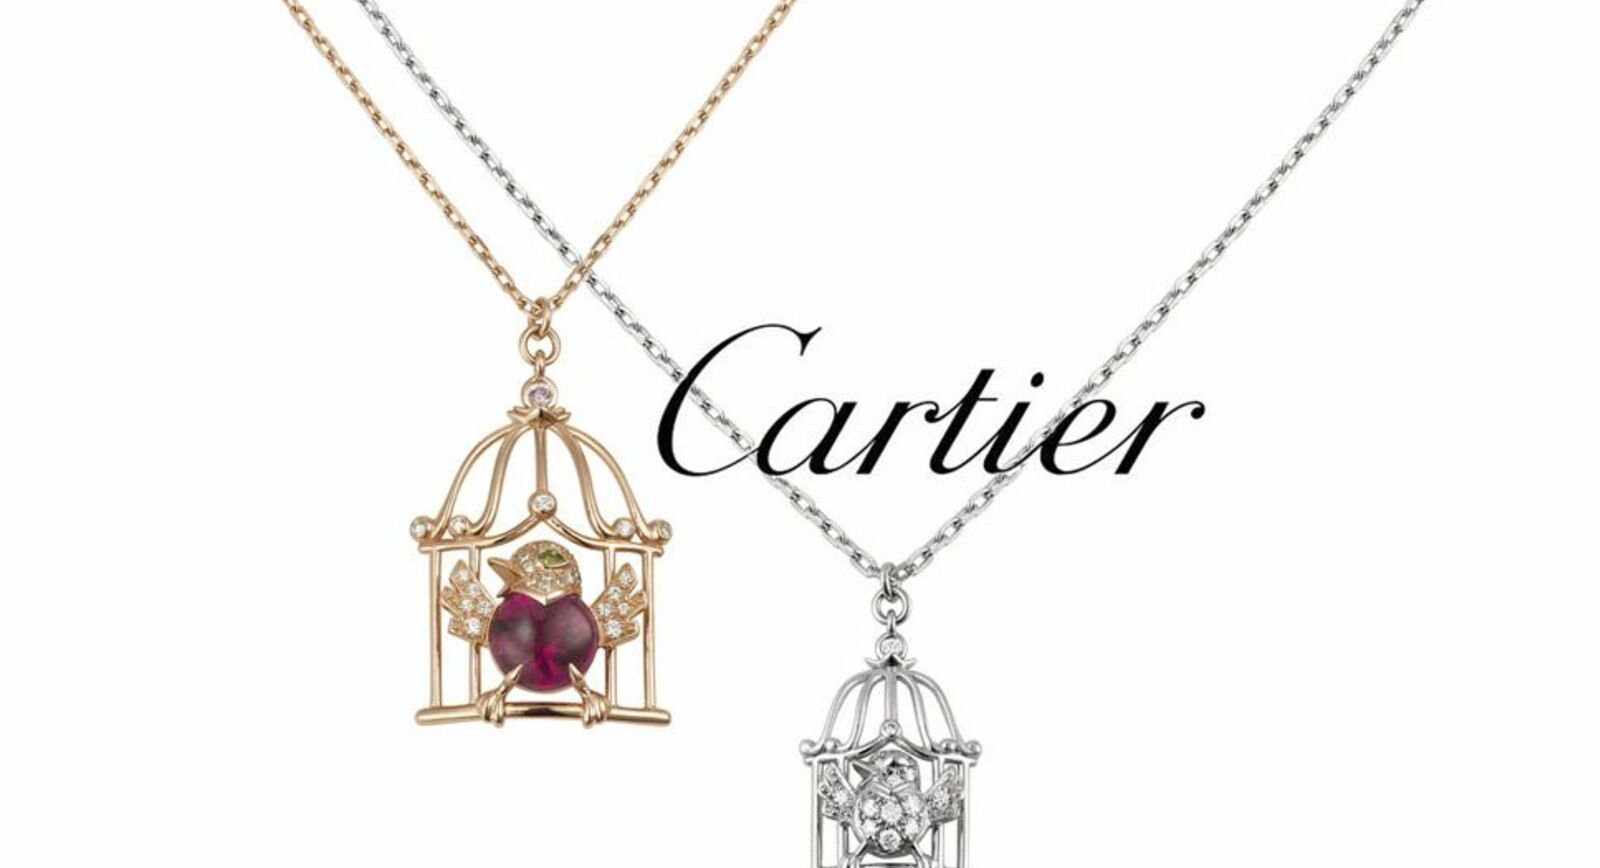 Free as a Bird – an Important Jewel by Cartier